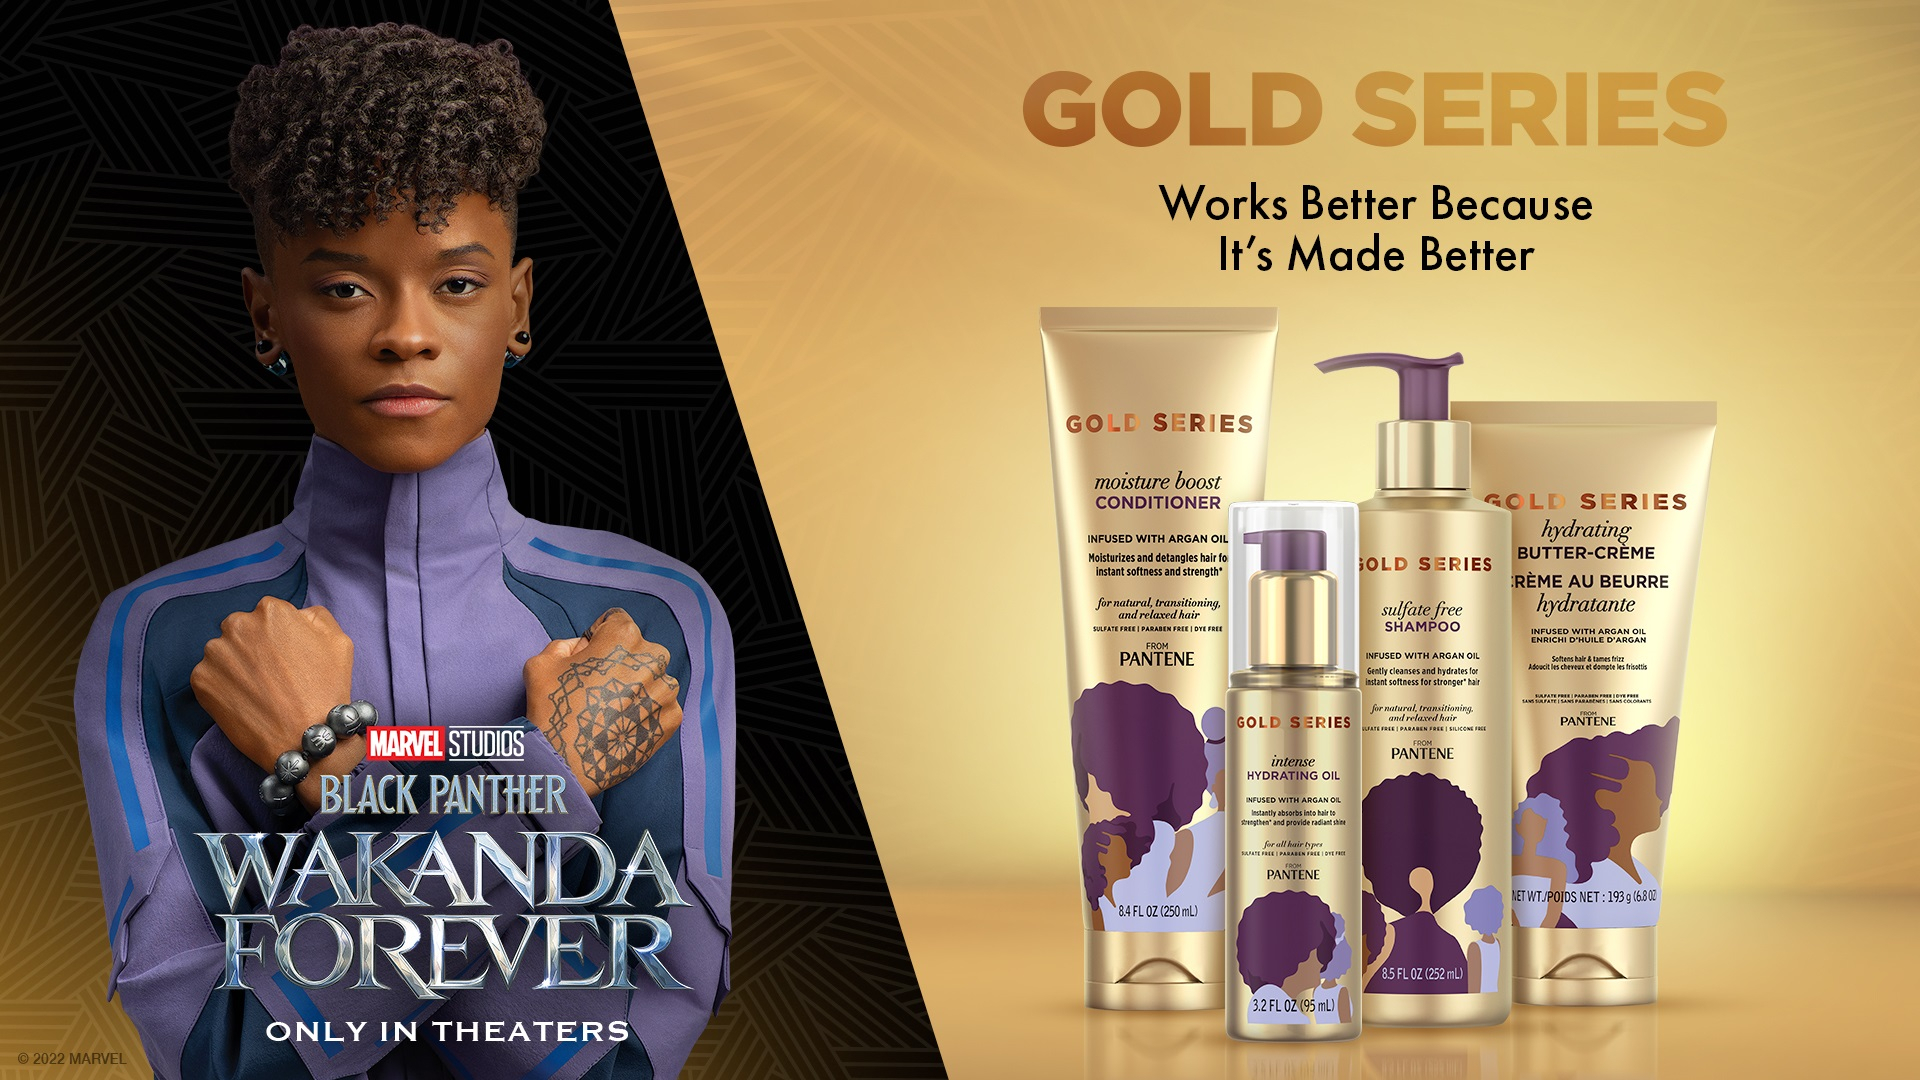 Multicultural Haircare Brands My Black Is Beautiful and Gold Series Team up  With Marvel Studios' “Black Panther: Wakanda Forever” to Celebrate Black  Joy and Beauty | Business Wire